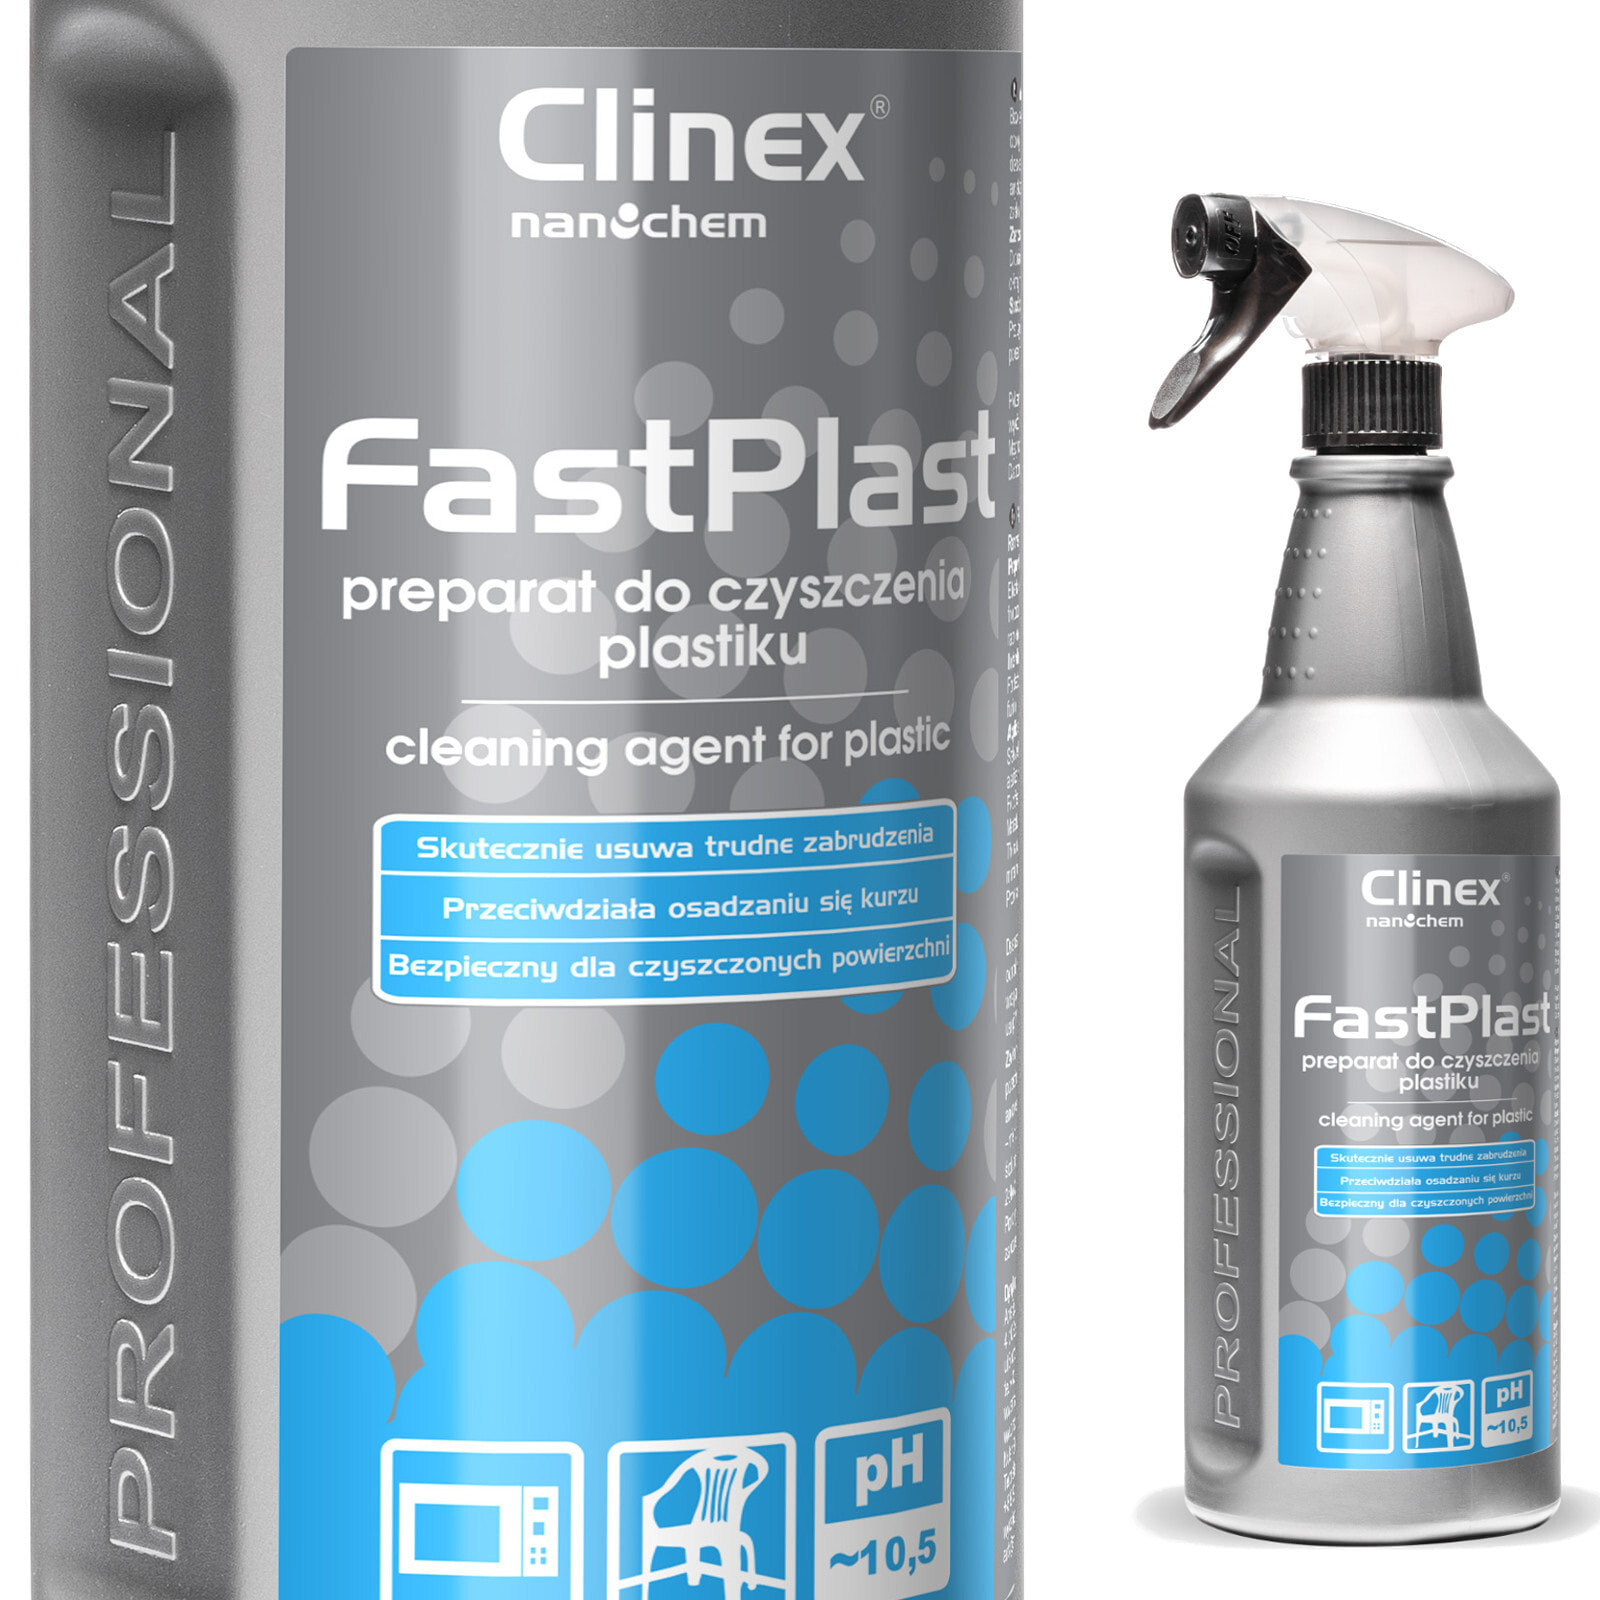 Antistatic CLINEX FastPlast 1L preparation for cleaning plastic, RTV, household appliances, furniture